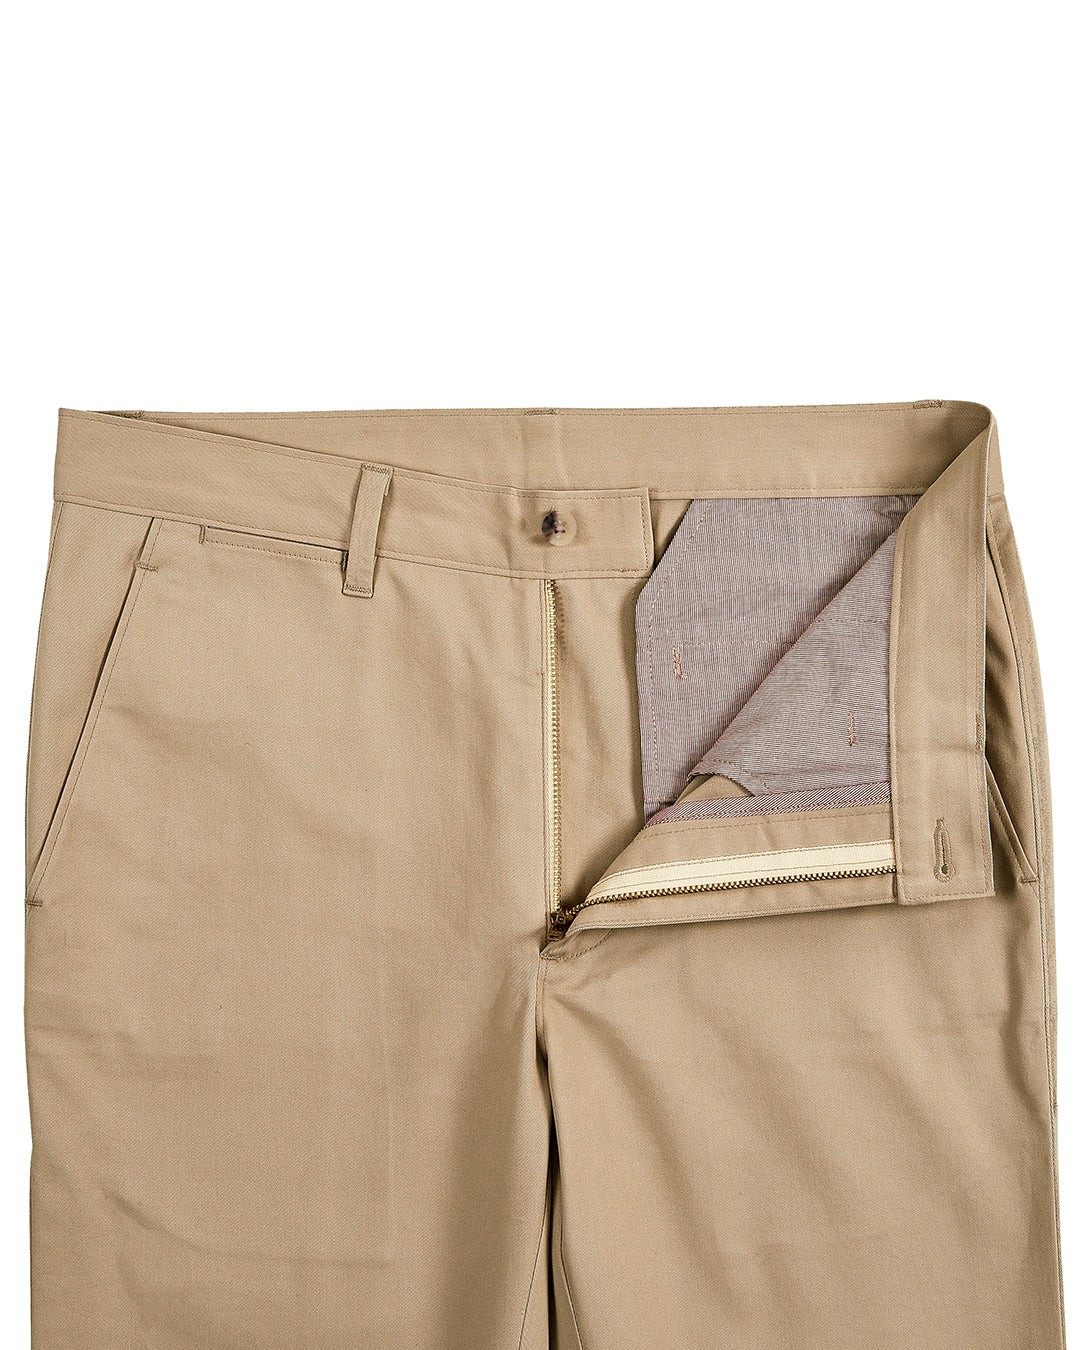 Front open view of custom Genoa Chino pants for men by Luxire in beige